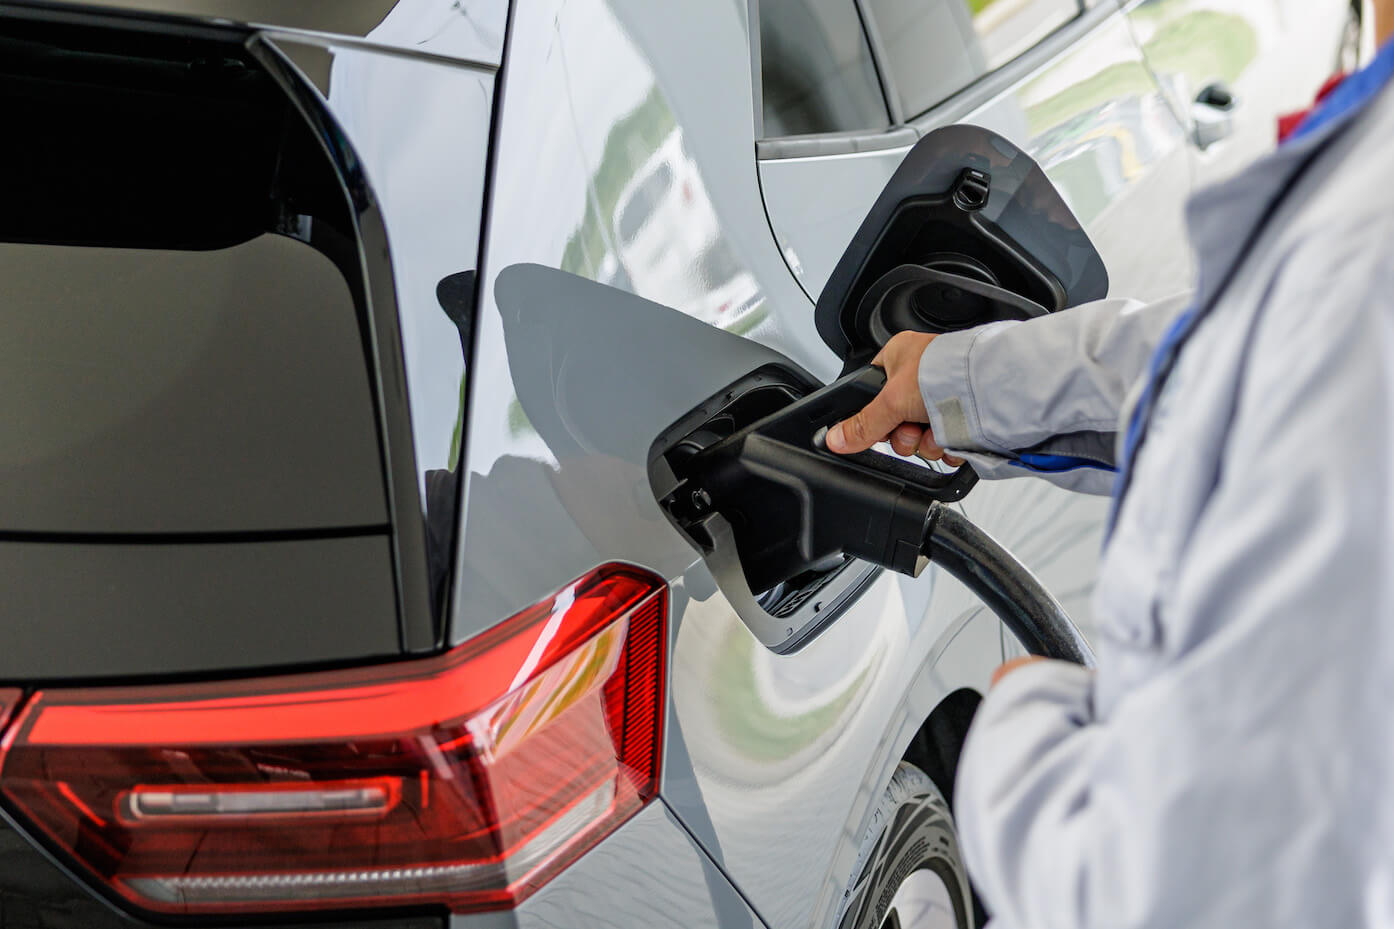 A worker demonstrates the EV charging process of Volkswagen's second generation ID.3 electric car